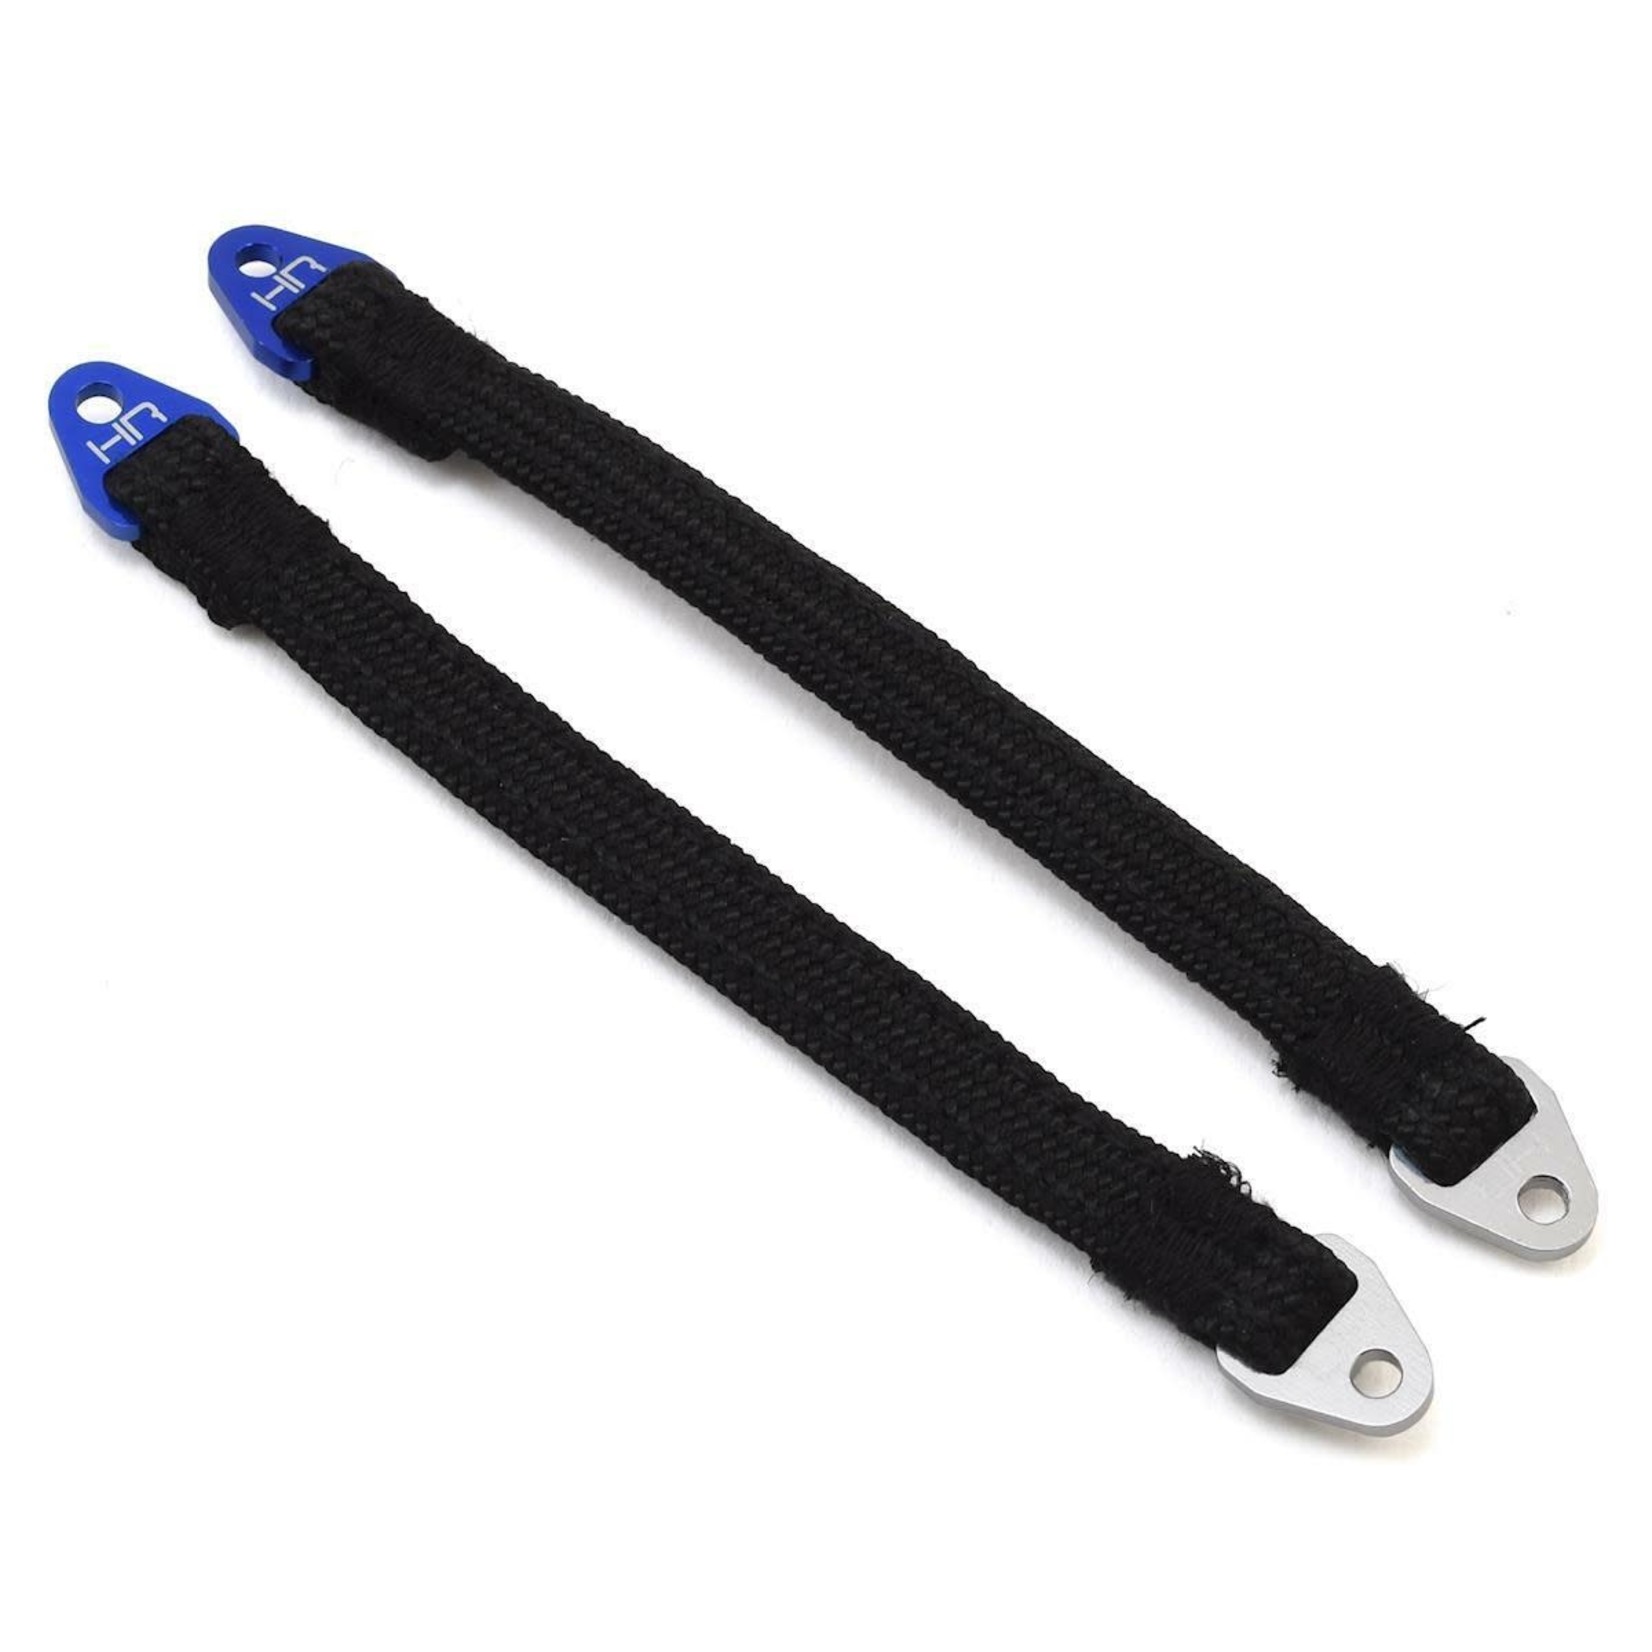 Hot Racing Hot Racing 115mm Suspension Travel Limit Straps